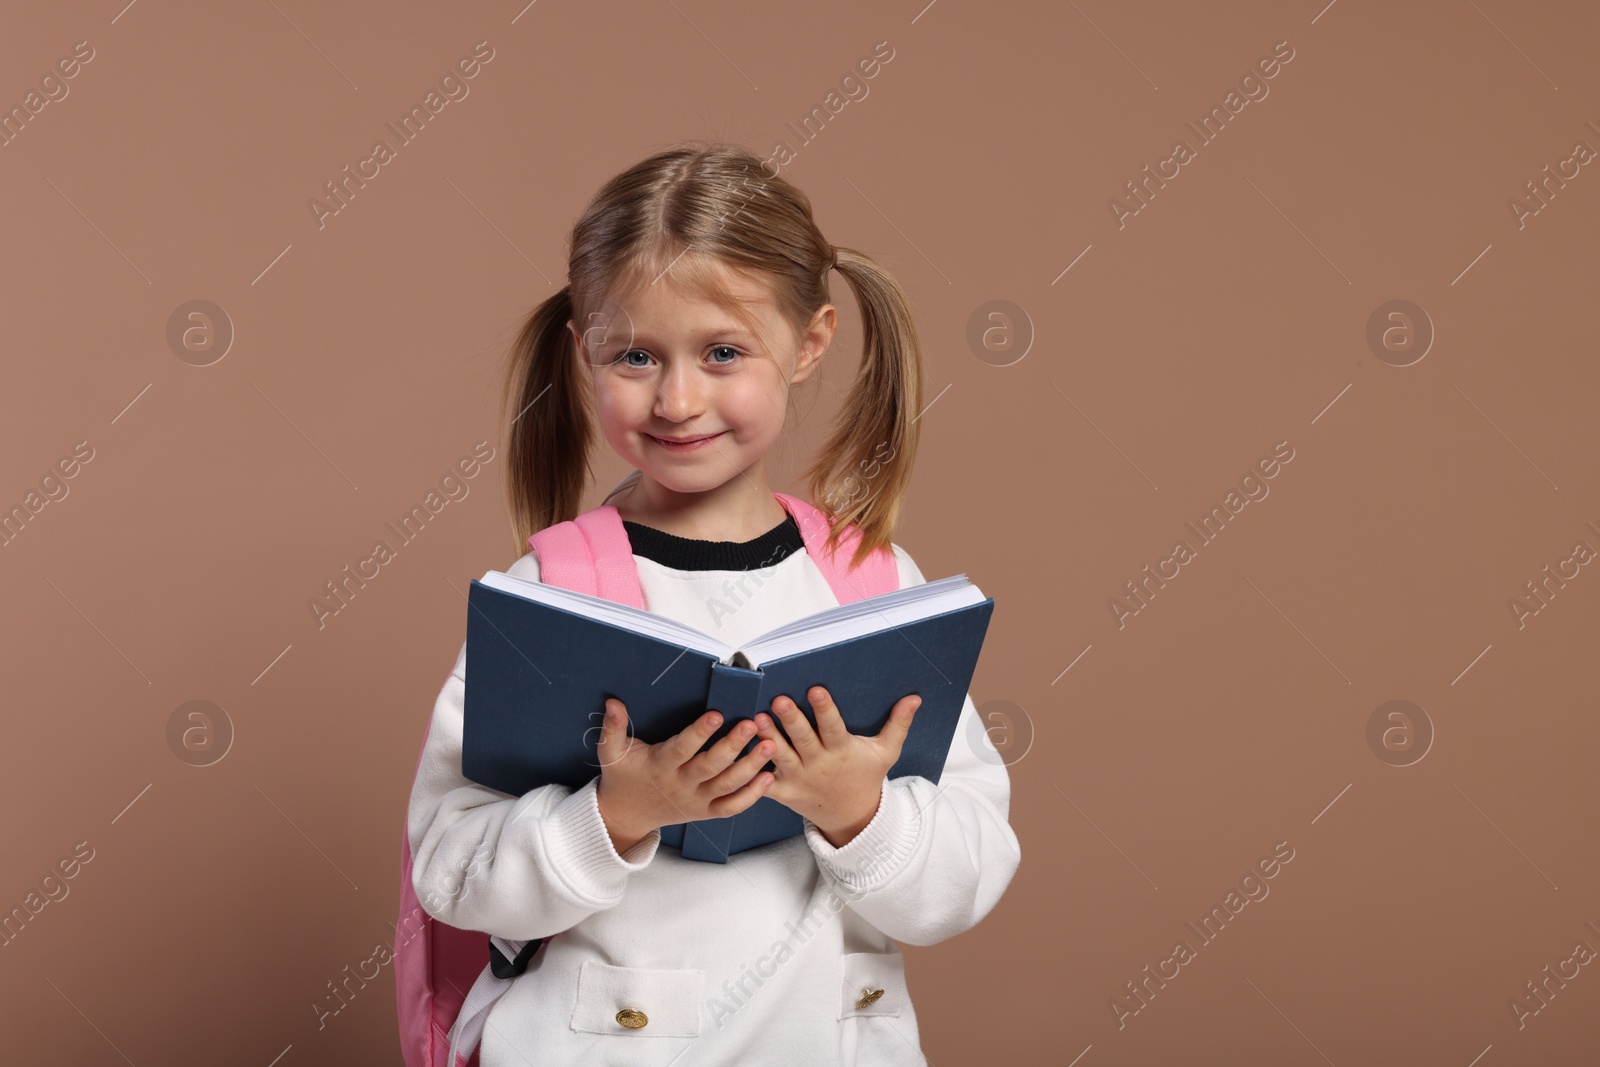 Photo of Happy schoolgirl with backpack and book on brown background